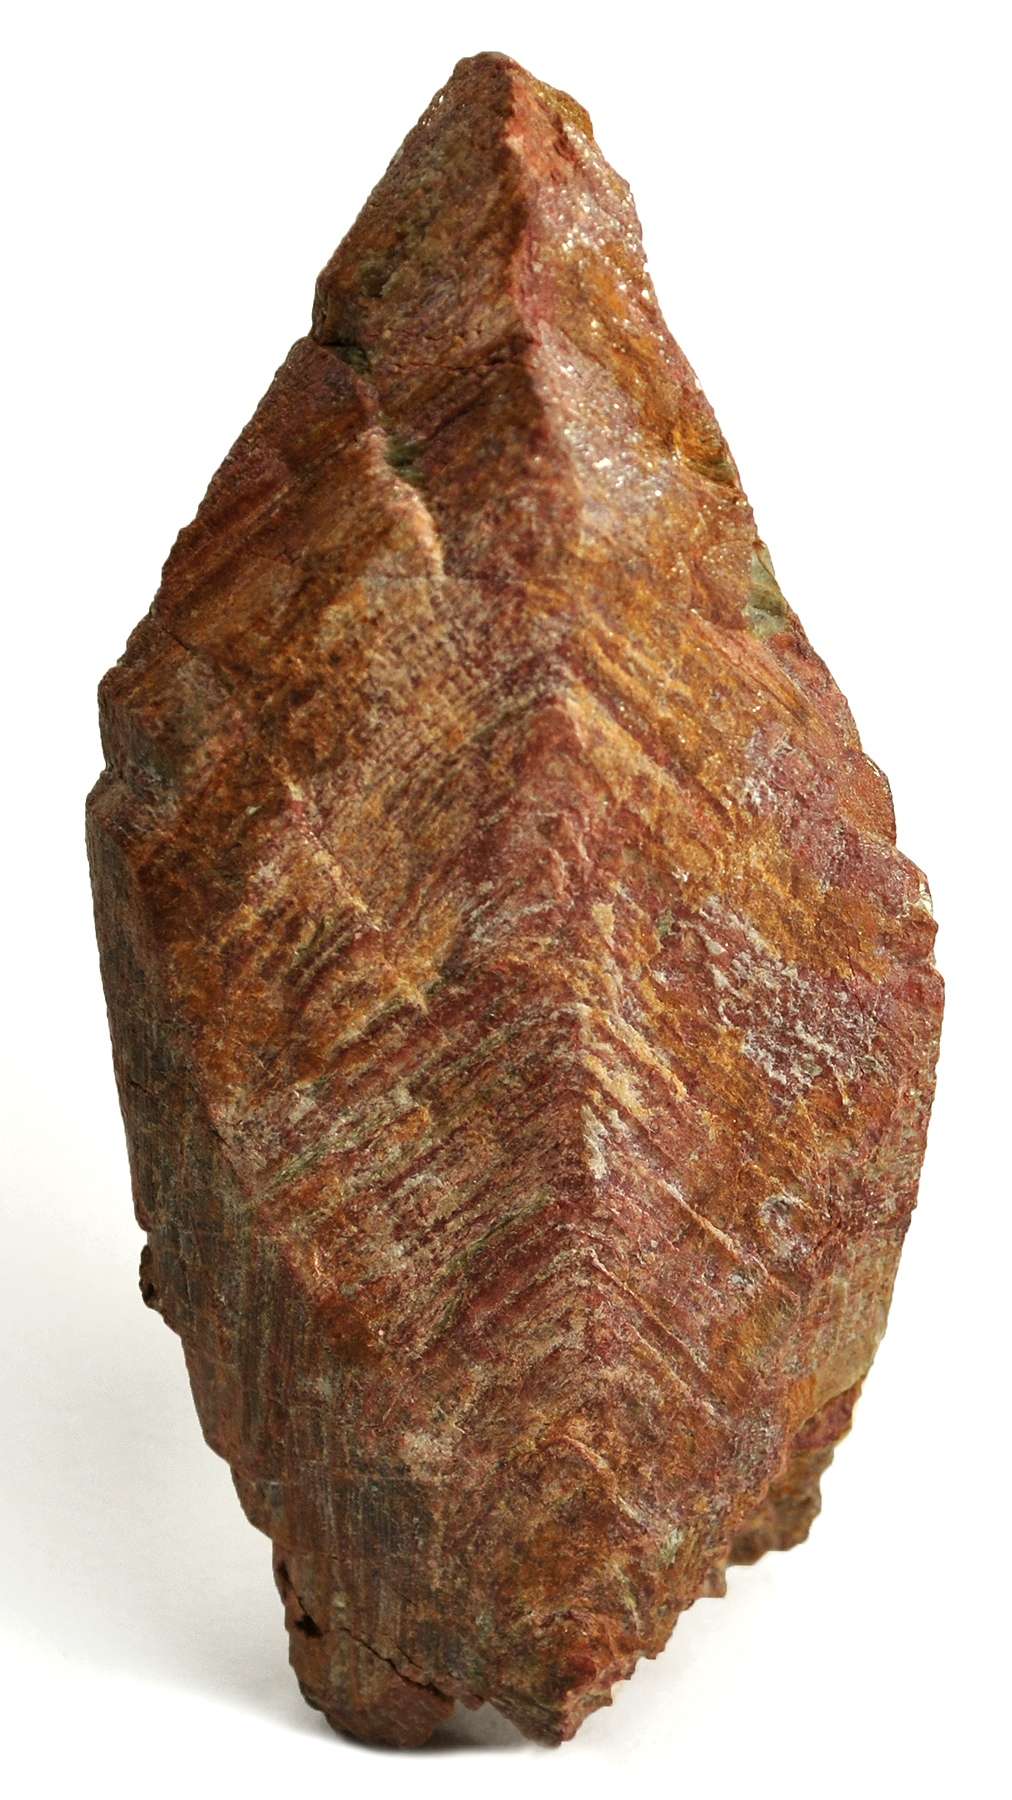 Twinned Prismatic Monazite Crystal from Guy #2 Mine, Elk Mountain, San Miguel County, New Mexico